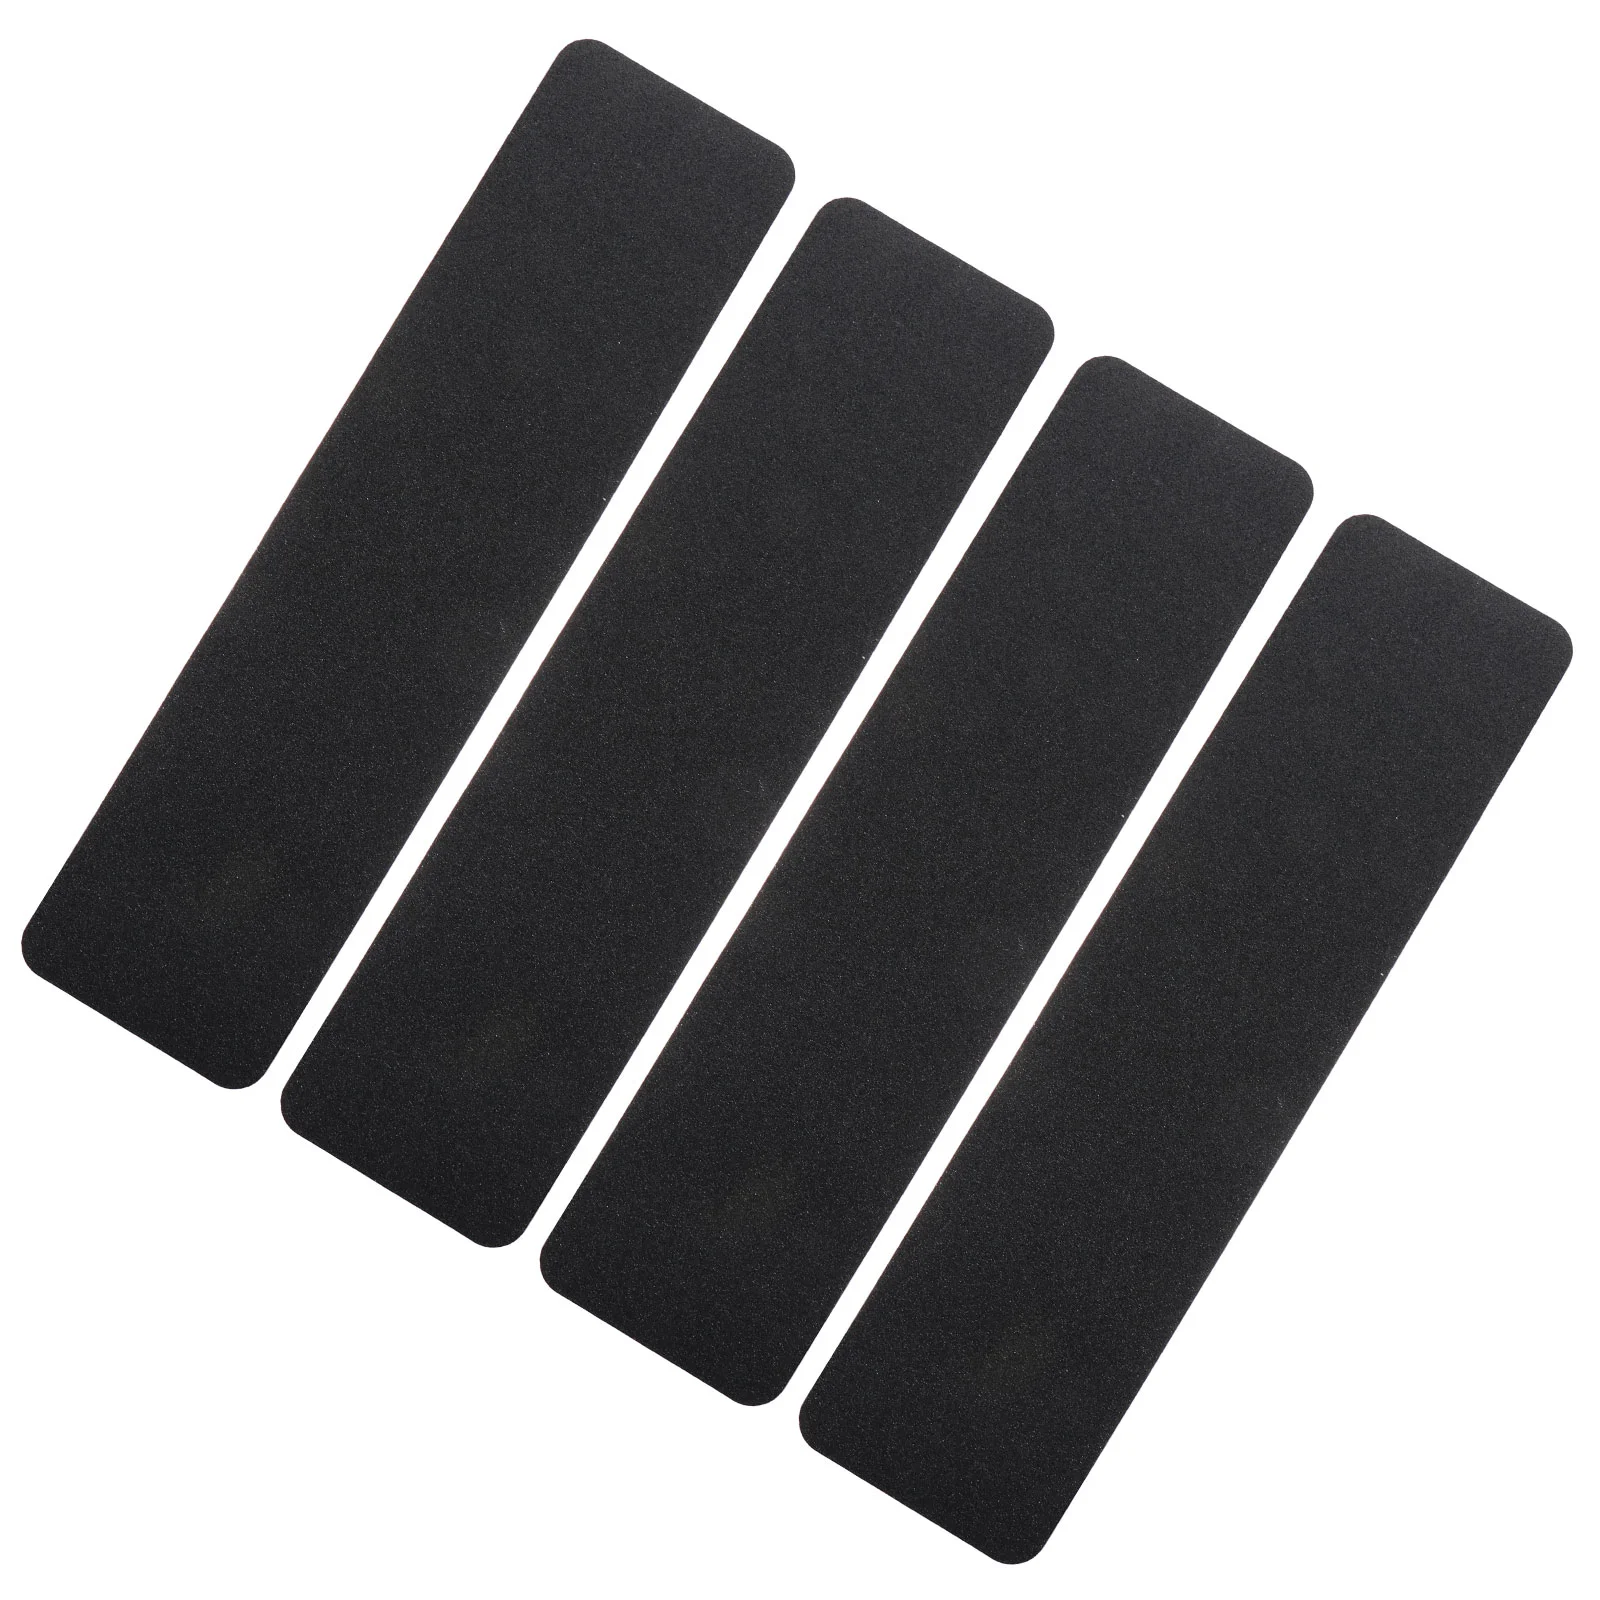 

4 Pcs Sticker Anti-slip Strip Non Skid Strips For Outside Steps Clear Tape Non Slippery Stair Grip Indoor Area Rug Pvc Duct